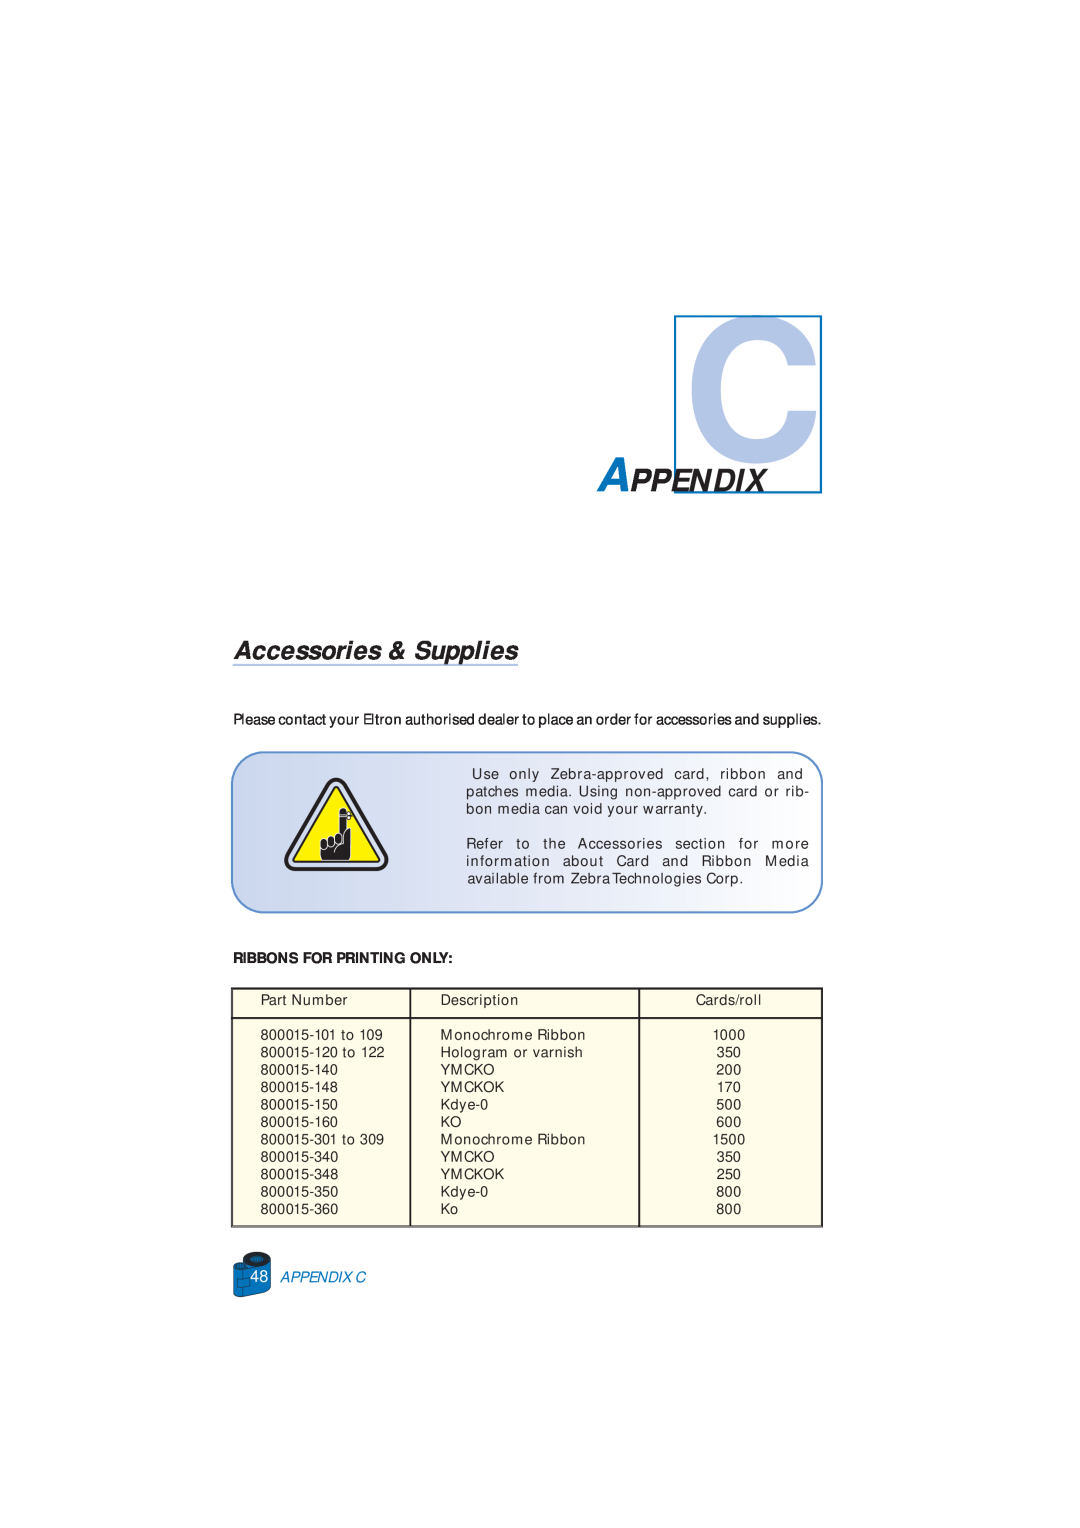 Zebra Technologies P520 user manual Accessories & Supplies, Appendix C, Ribbons For Printing Only 